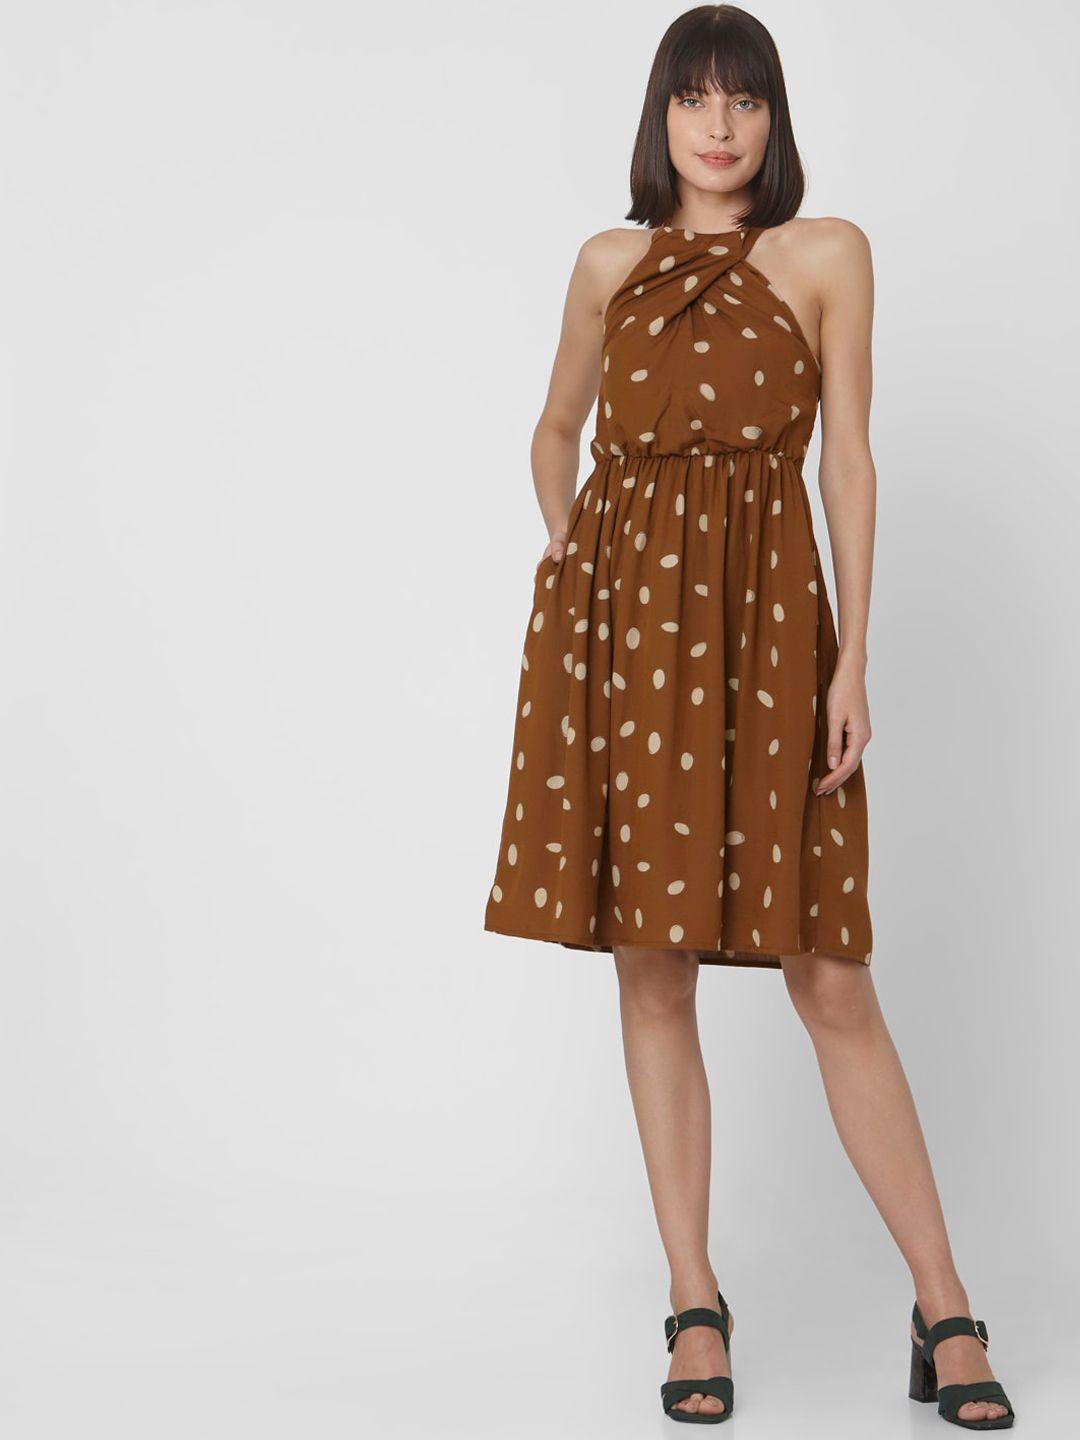 vero moda women brown printed fit and flare dress